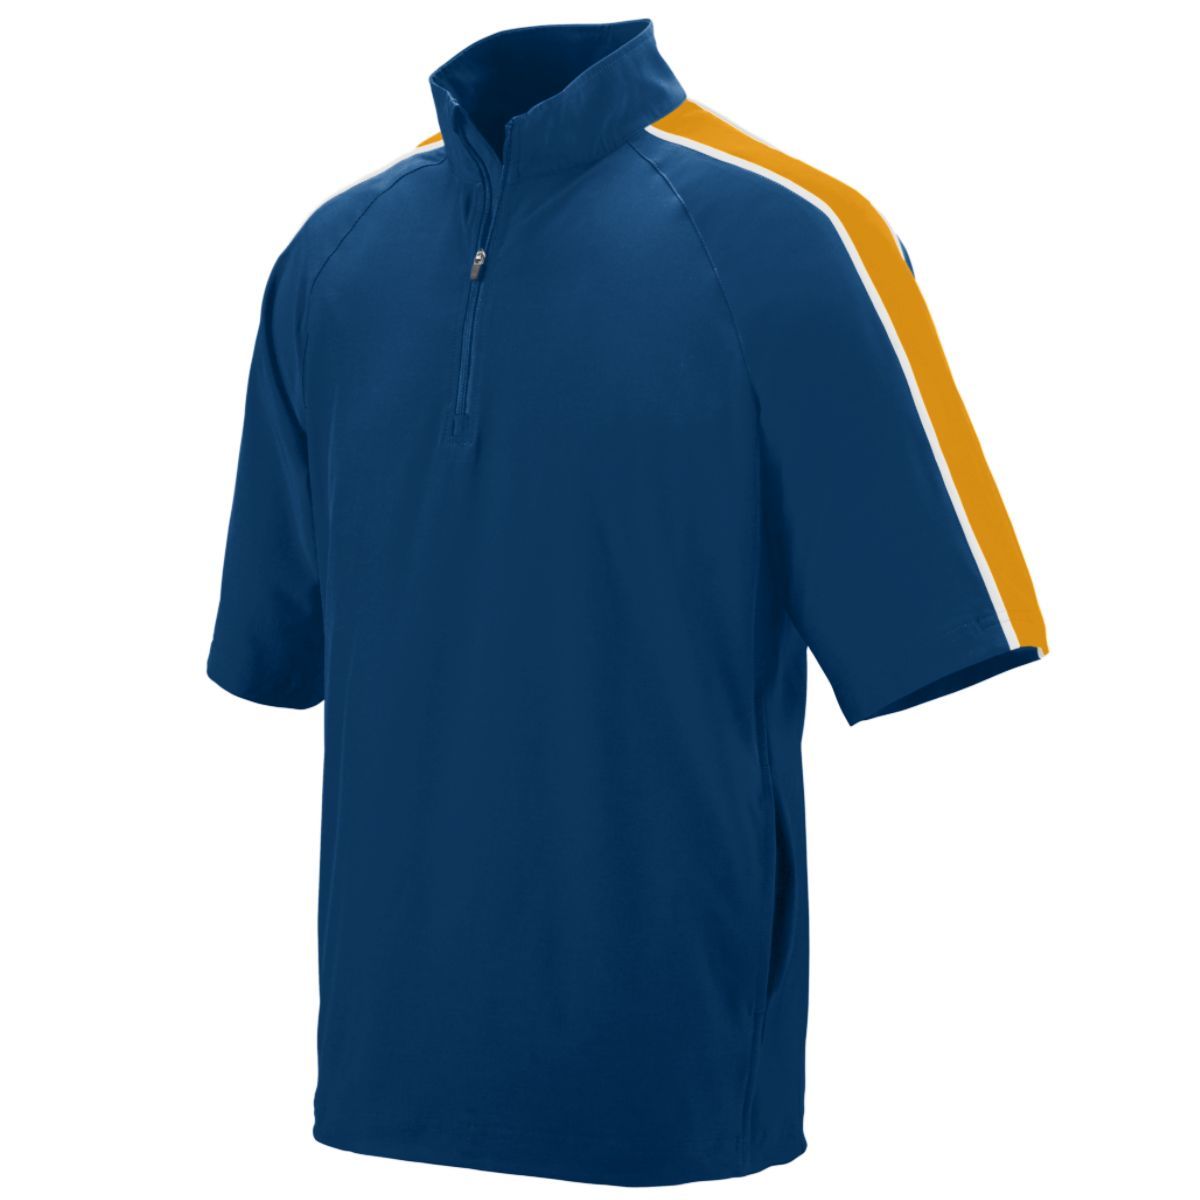 Augusta Sportswear Quantum Short Sleeve Pullover in Navy/Gold/White  -Part of the Adult, Adult-Jacket, Augusta-Products, Outerwear product lines at KanaleyCreations.com